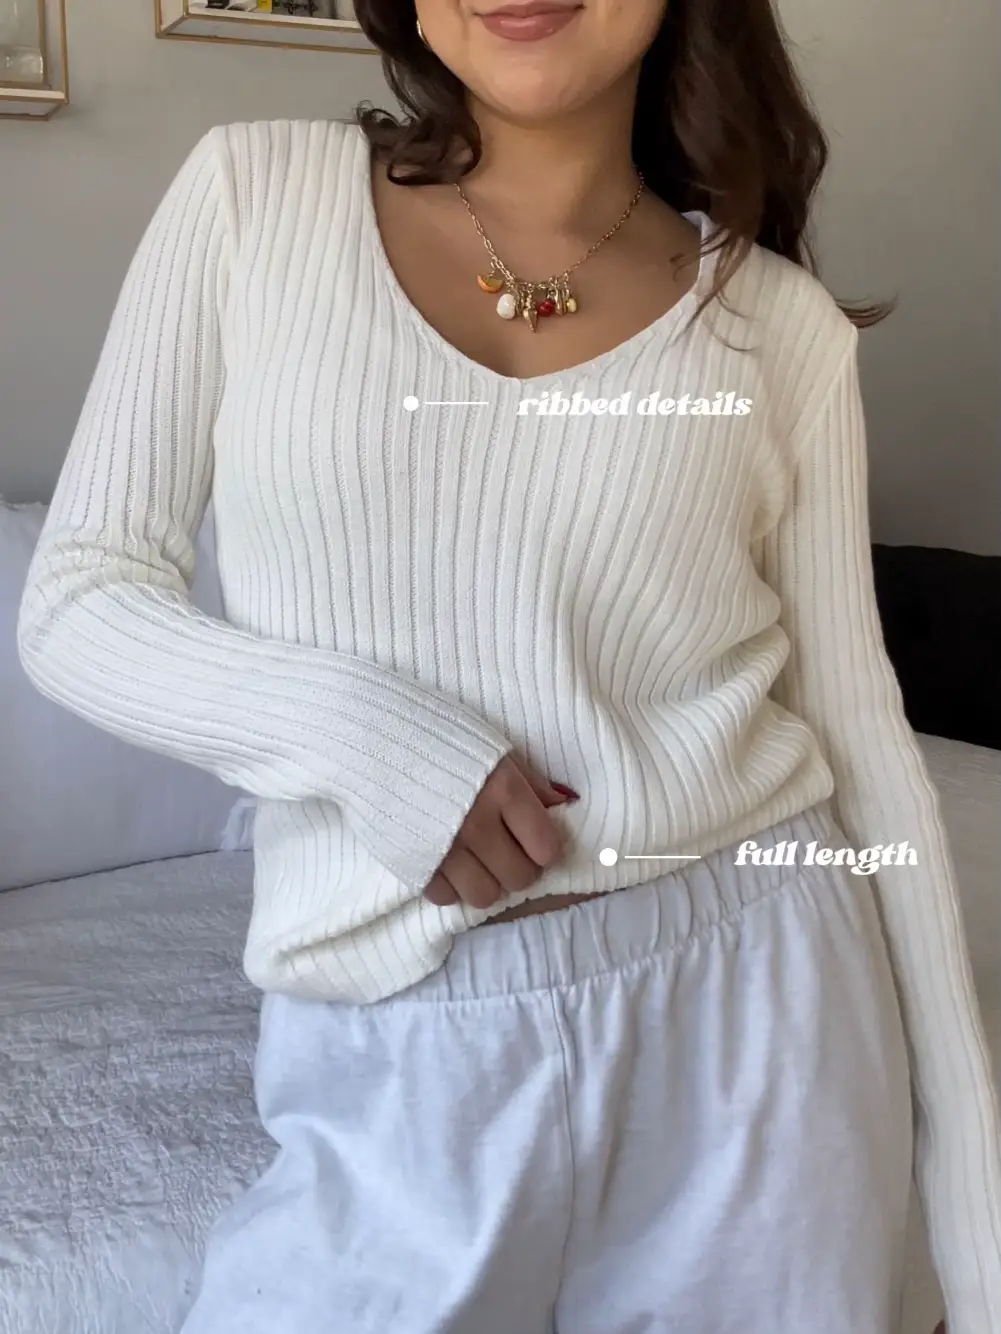 BRANDY MELVILLE SWEATERS HAUL, Gallery posted by riannagail